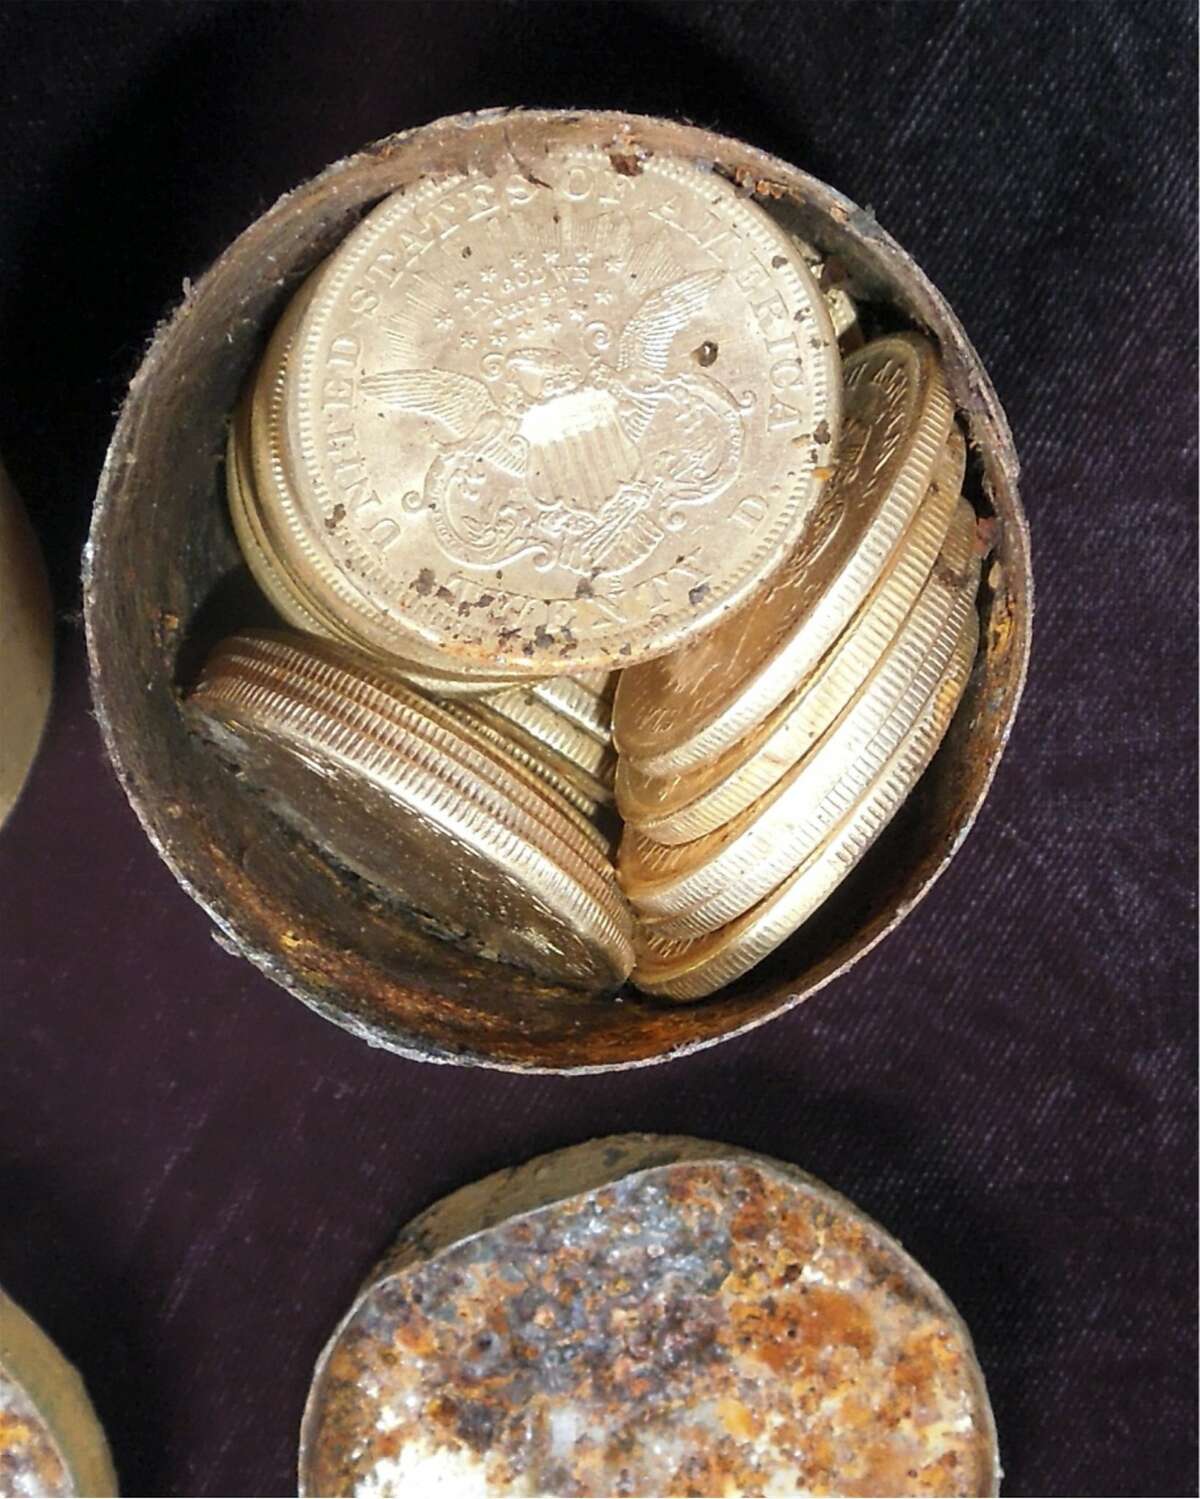 This image provided by the Saddle Ridge Hoard discoverers via Kagin's, Inc., shows one of the six decaying metal canisters filled with 1800s-era U.S. gold coins unearthed in California by two people who want to remain anonymous. The value of the "Saddle Ridge Hoard" treasure trove is estimated at $10 million or more. (AP Photo/Saddle Ridge Hoard discoverers via Kagin's, Inc.)